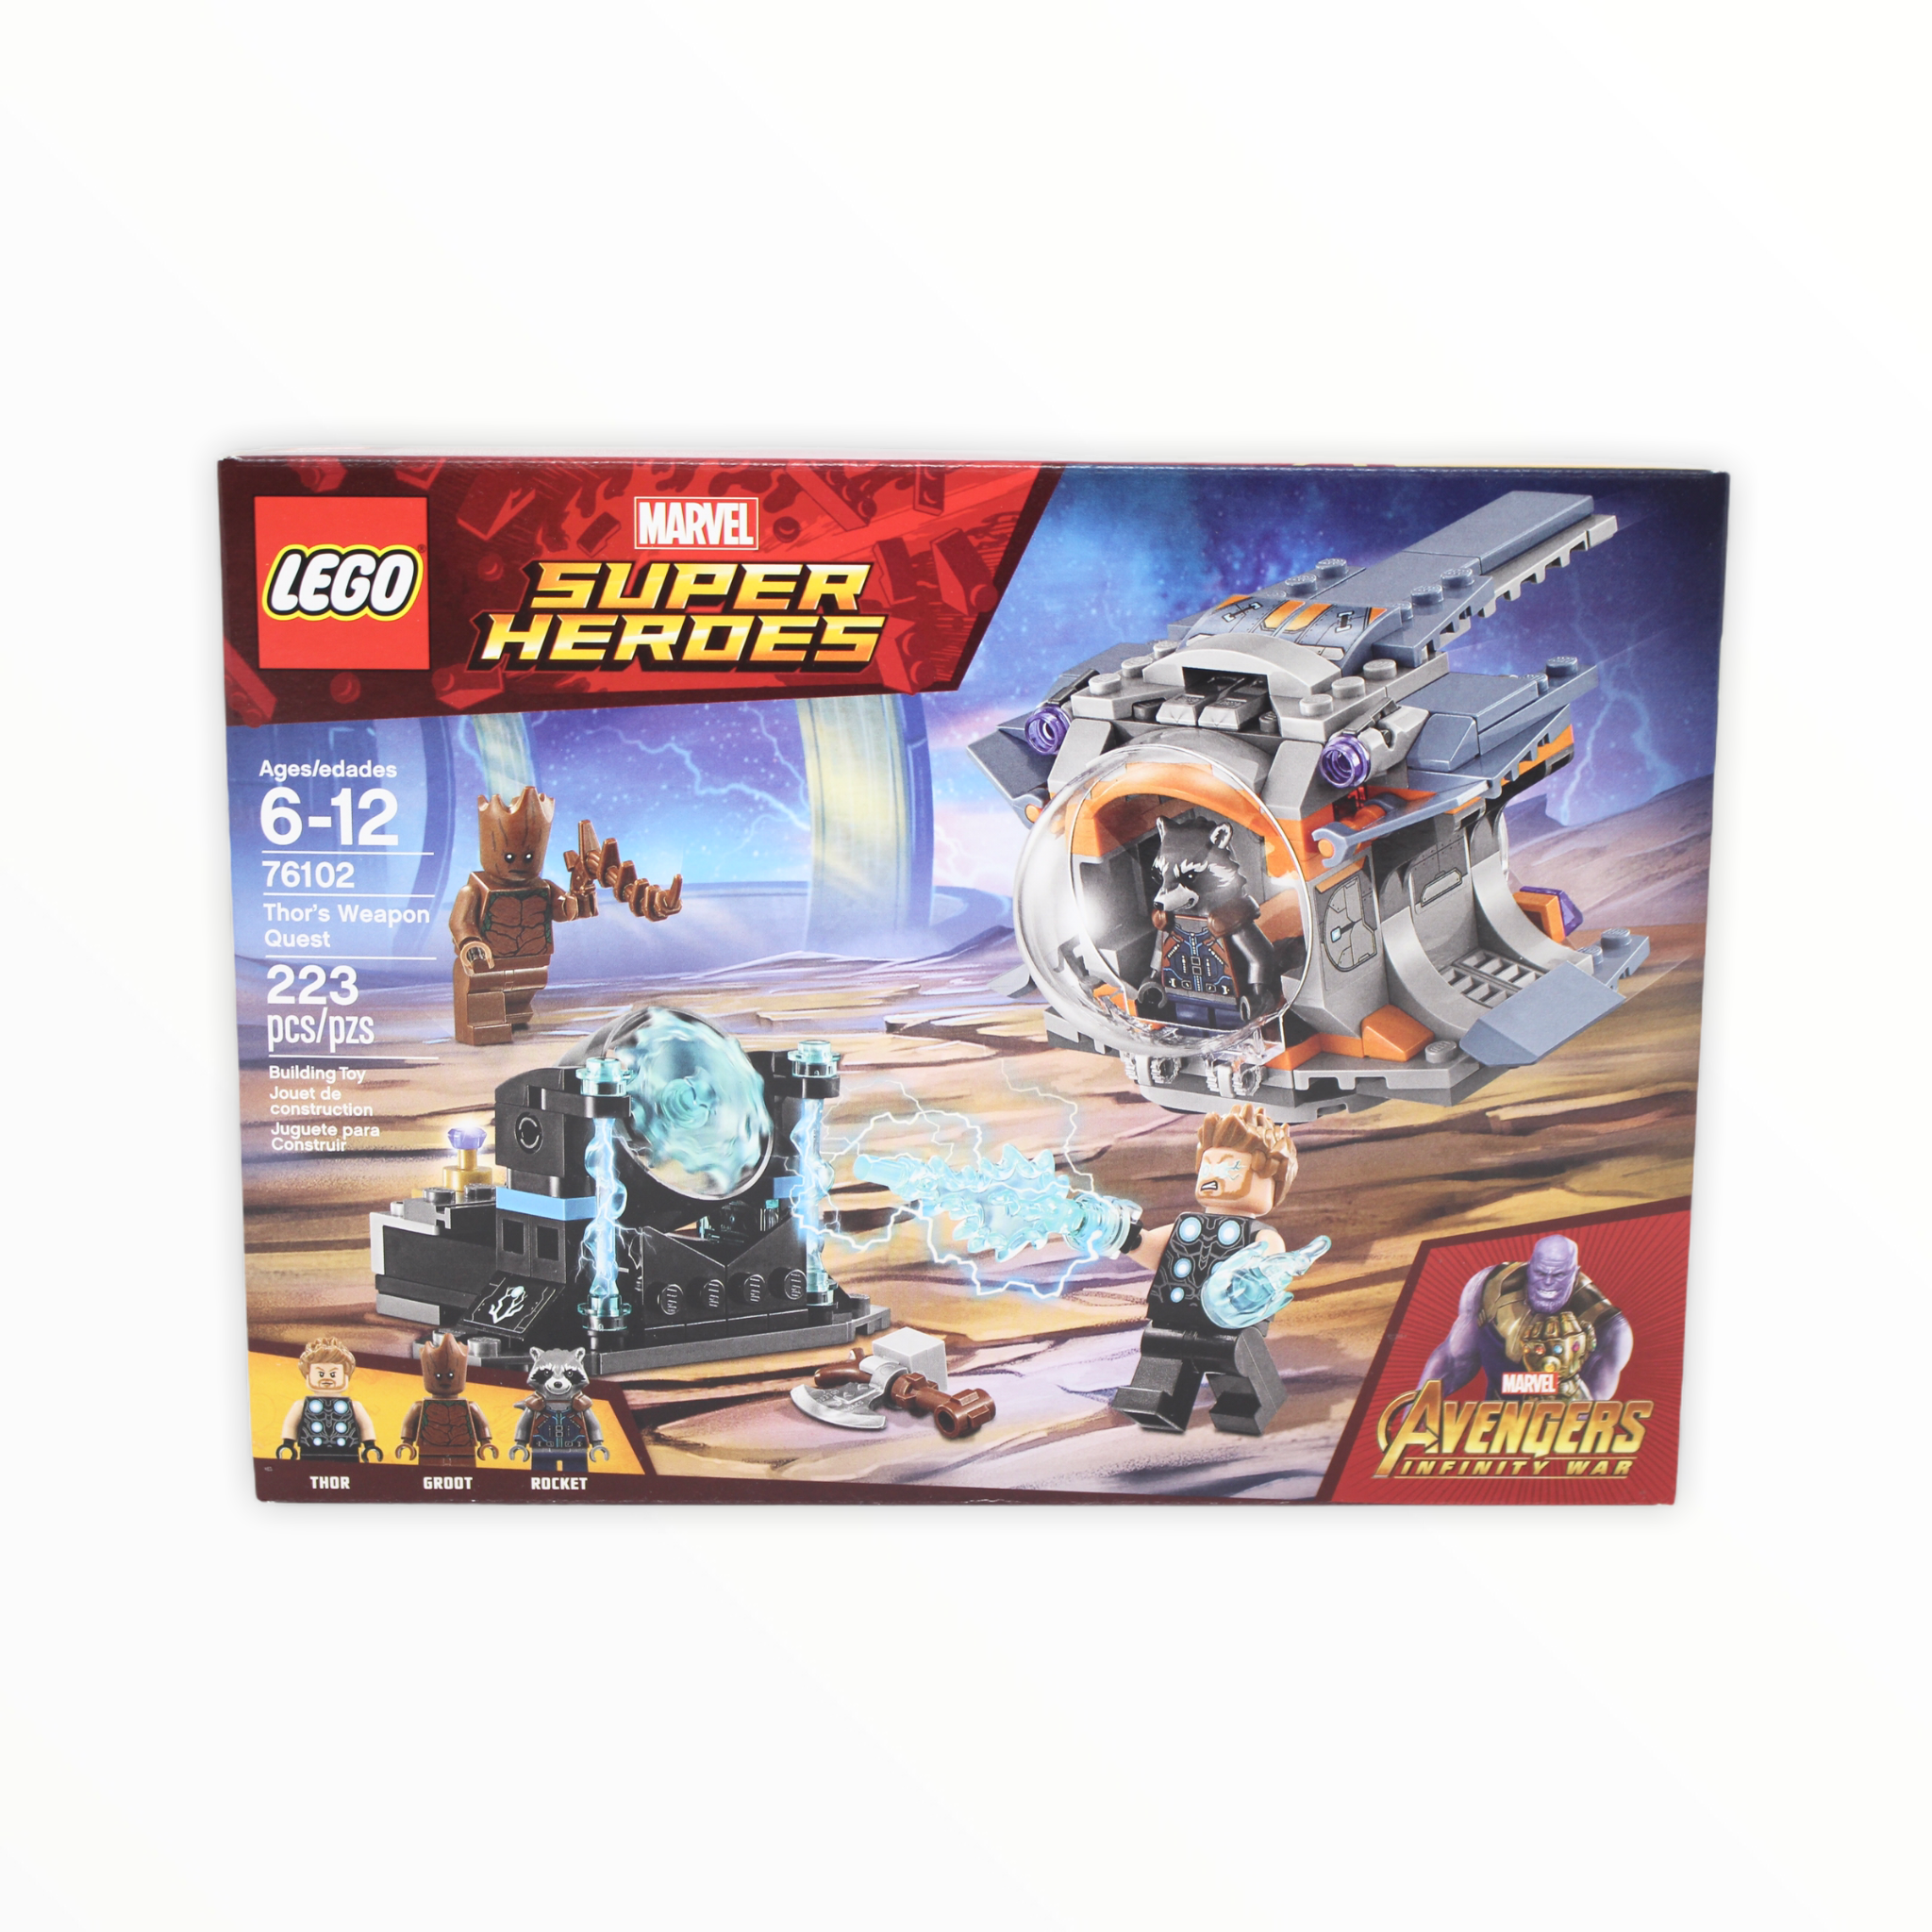 Retired Set 76102 Marvel Super Heroes Thor’s Weapon Quest